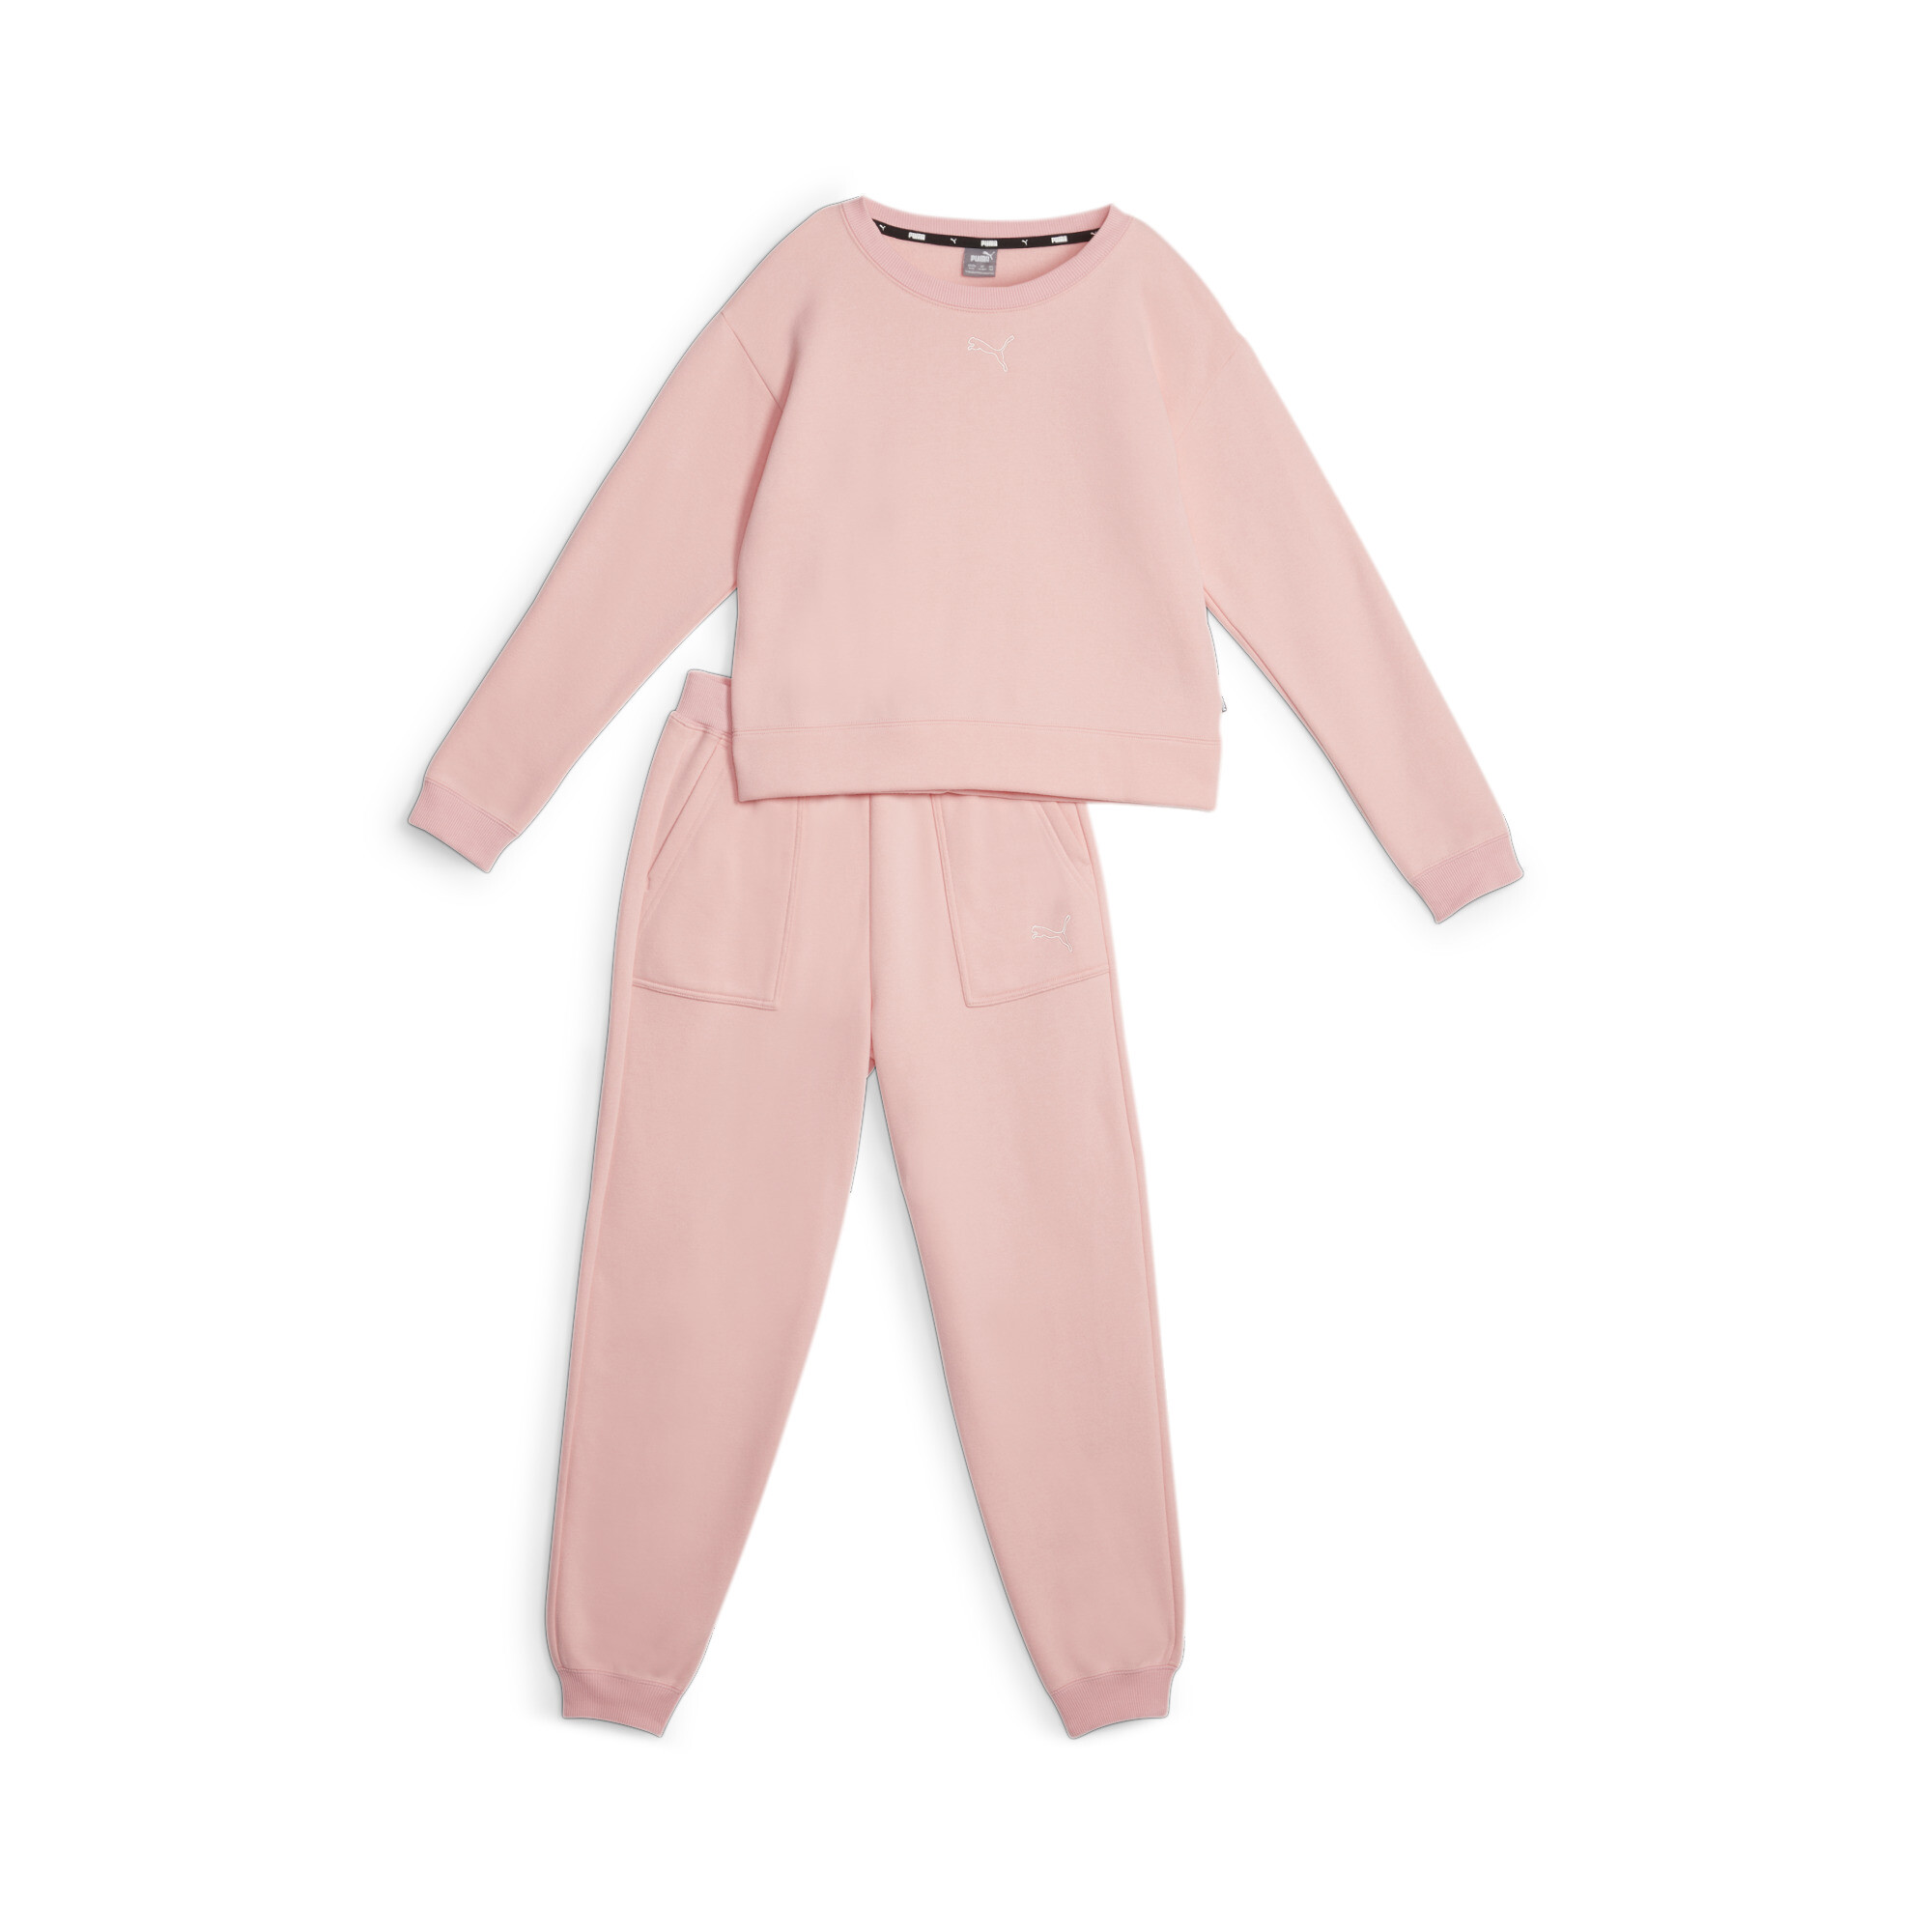 Women's Puma Loungewear Suit Youth, Pink, Size 3-4Y, Clothing